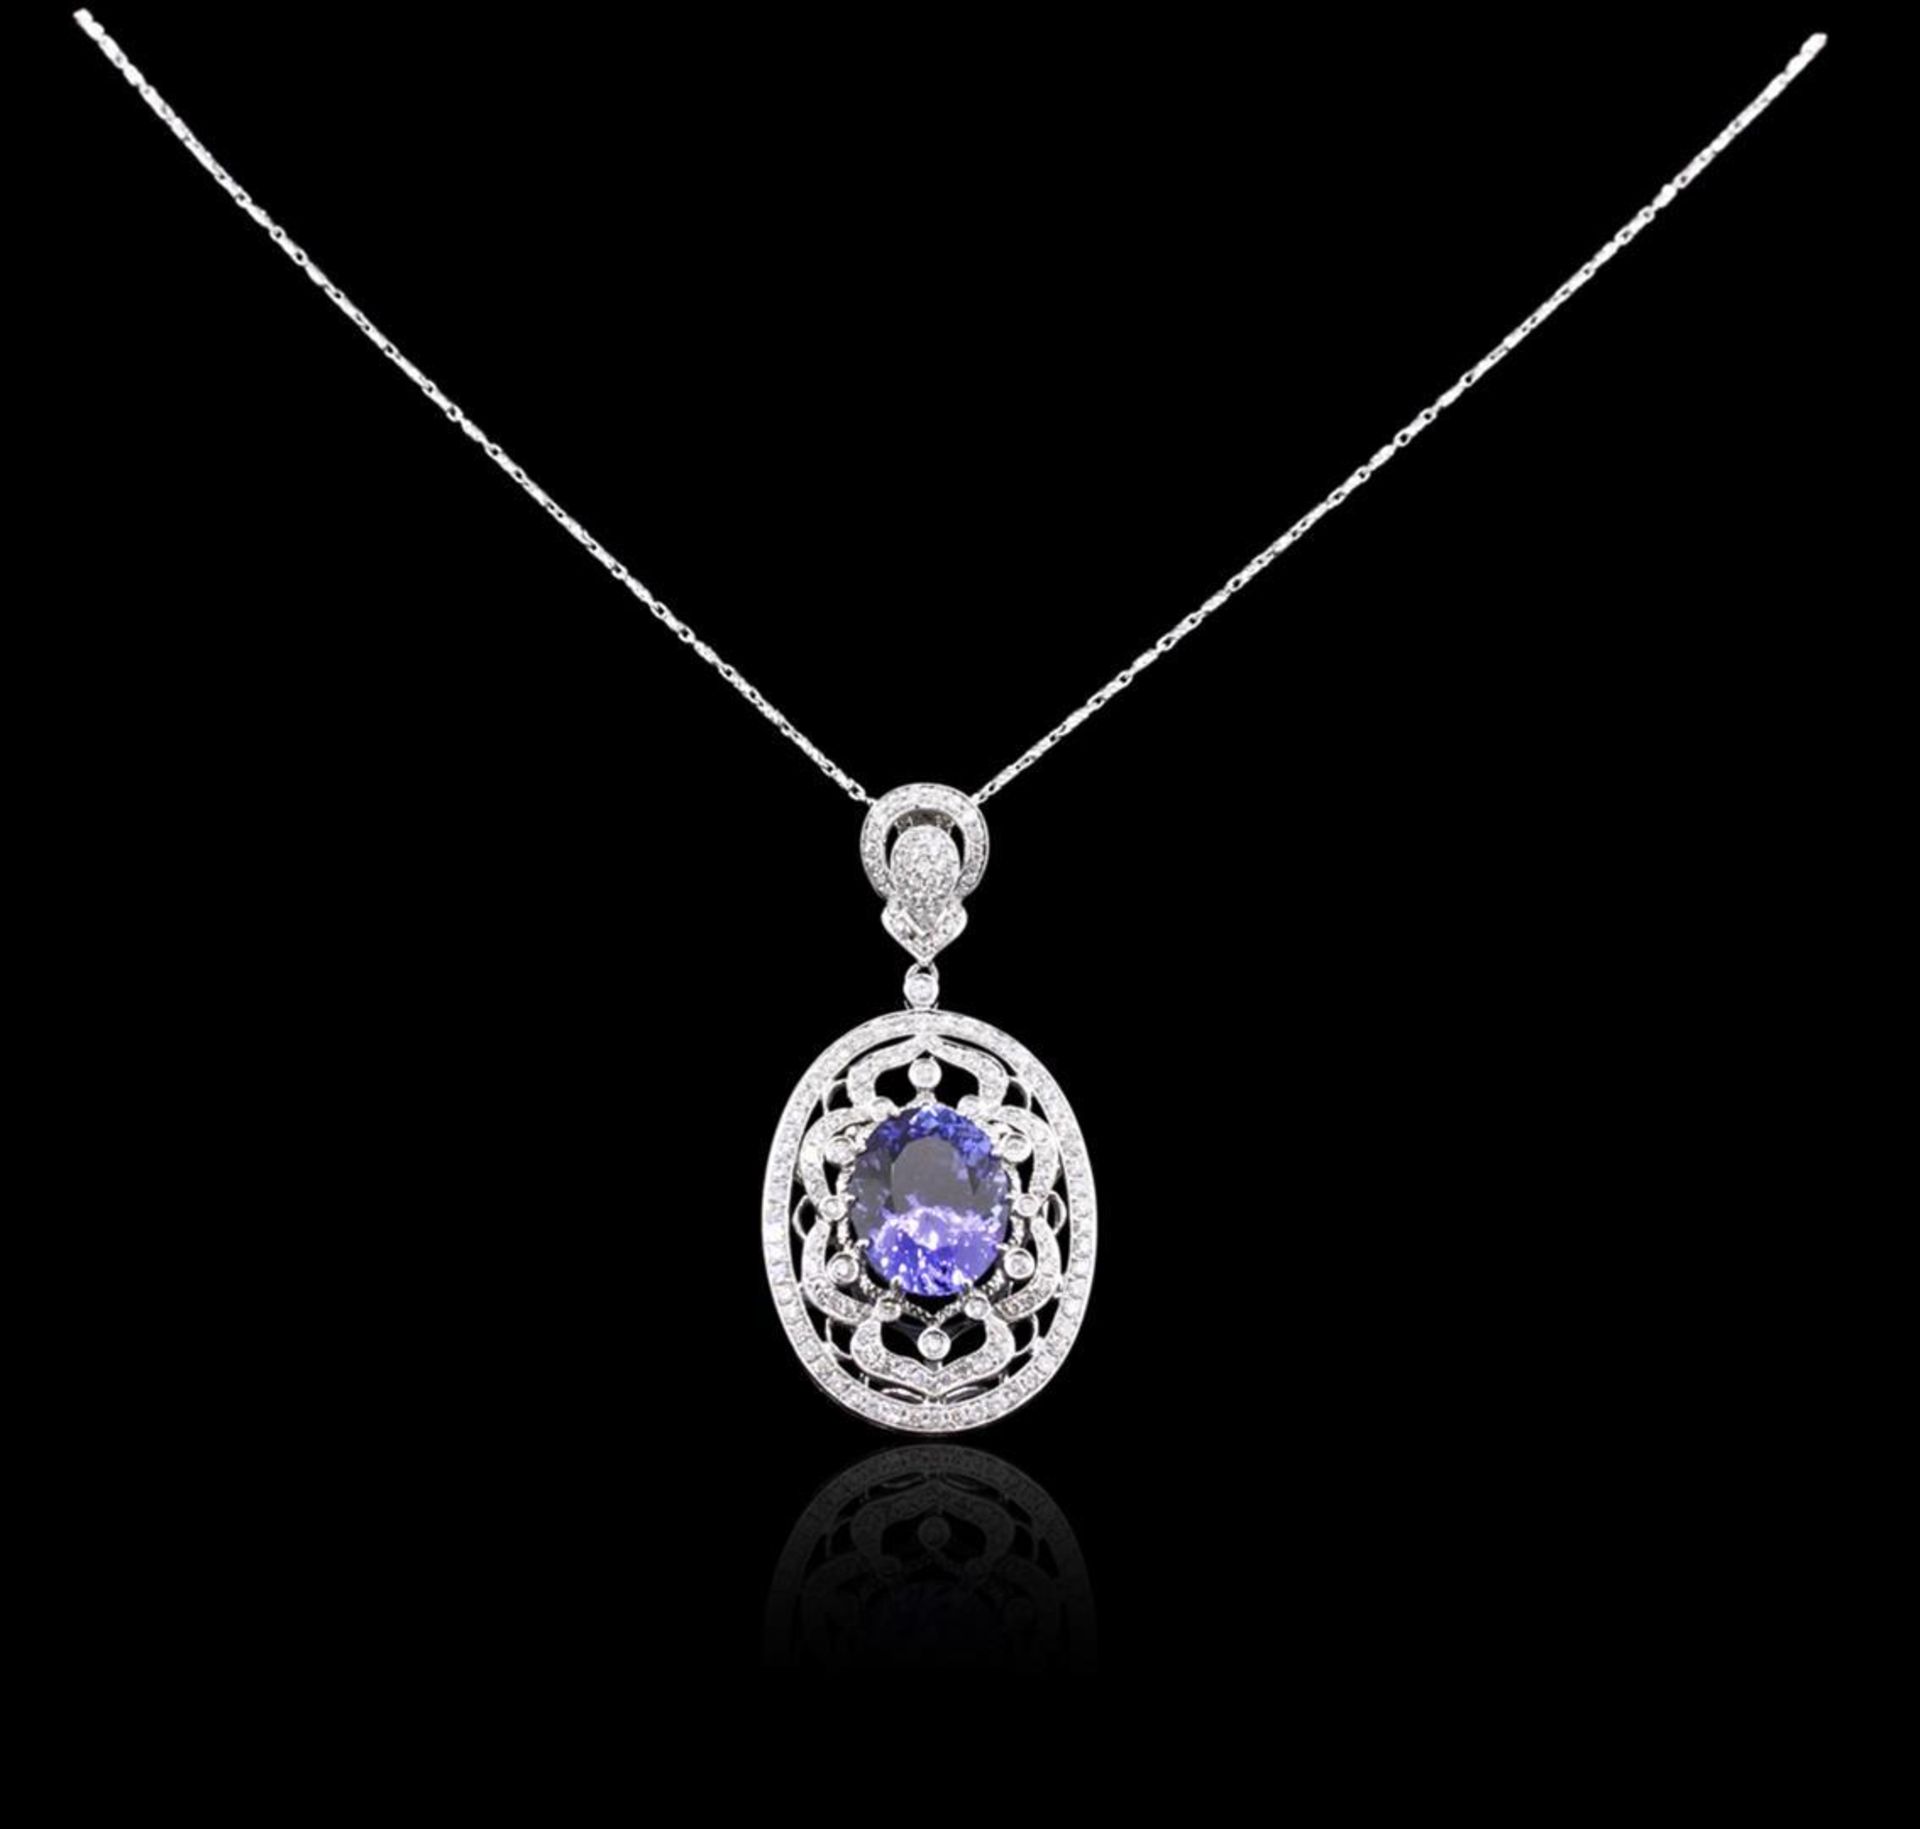 14KT White Gold 8.01 ctw Tanzanite and Diamond Pendant With Chain - Image 3 of 8